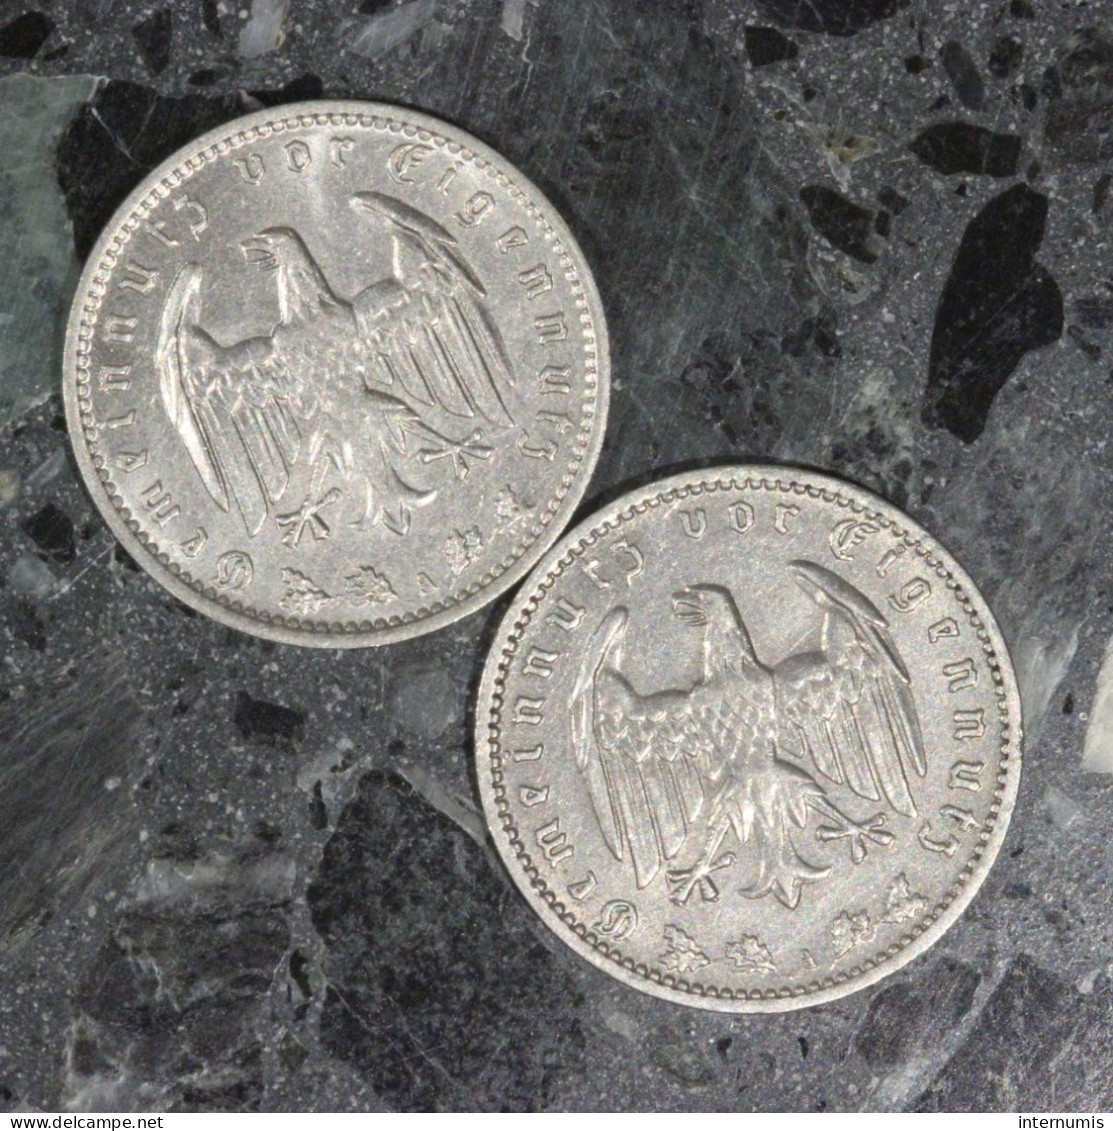 LOT (2) : 1 Mark 1935-A & 1937-A Allemagne / Germany, , 1 Reichsmark, 1935 & 1937, , Nickel, ,
KM# - Alla Rinfusa - Monete